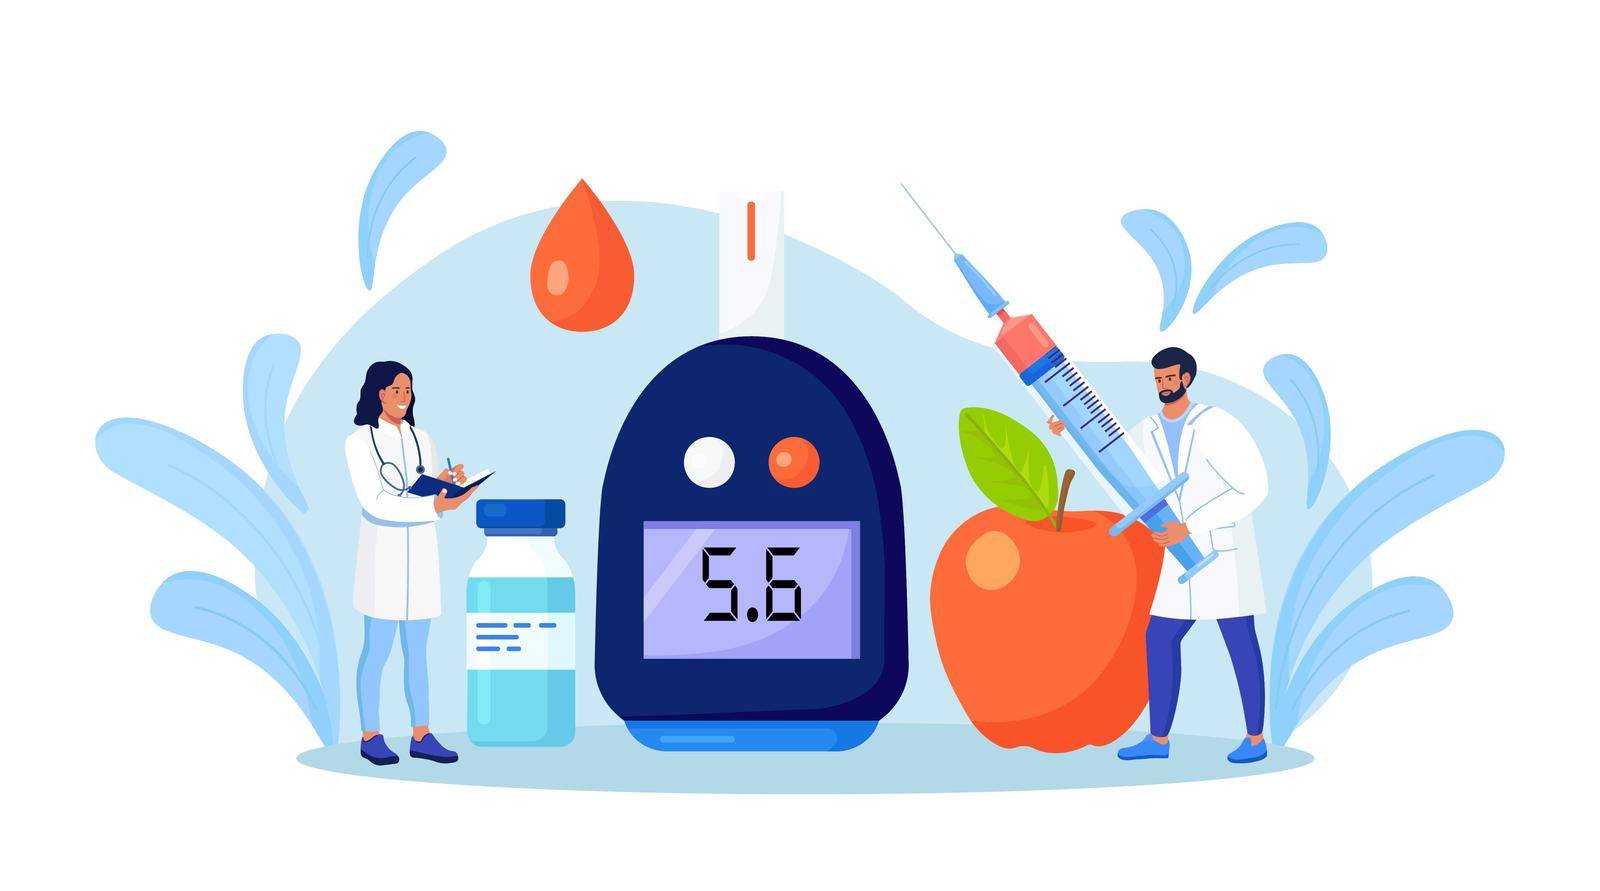 Doctors testing blood for glucose, using glucometer for hypoglycemia or diabetes diagnosis. Laboratory equipment and syringe. Physician measuring sugar level